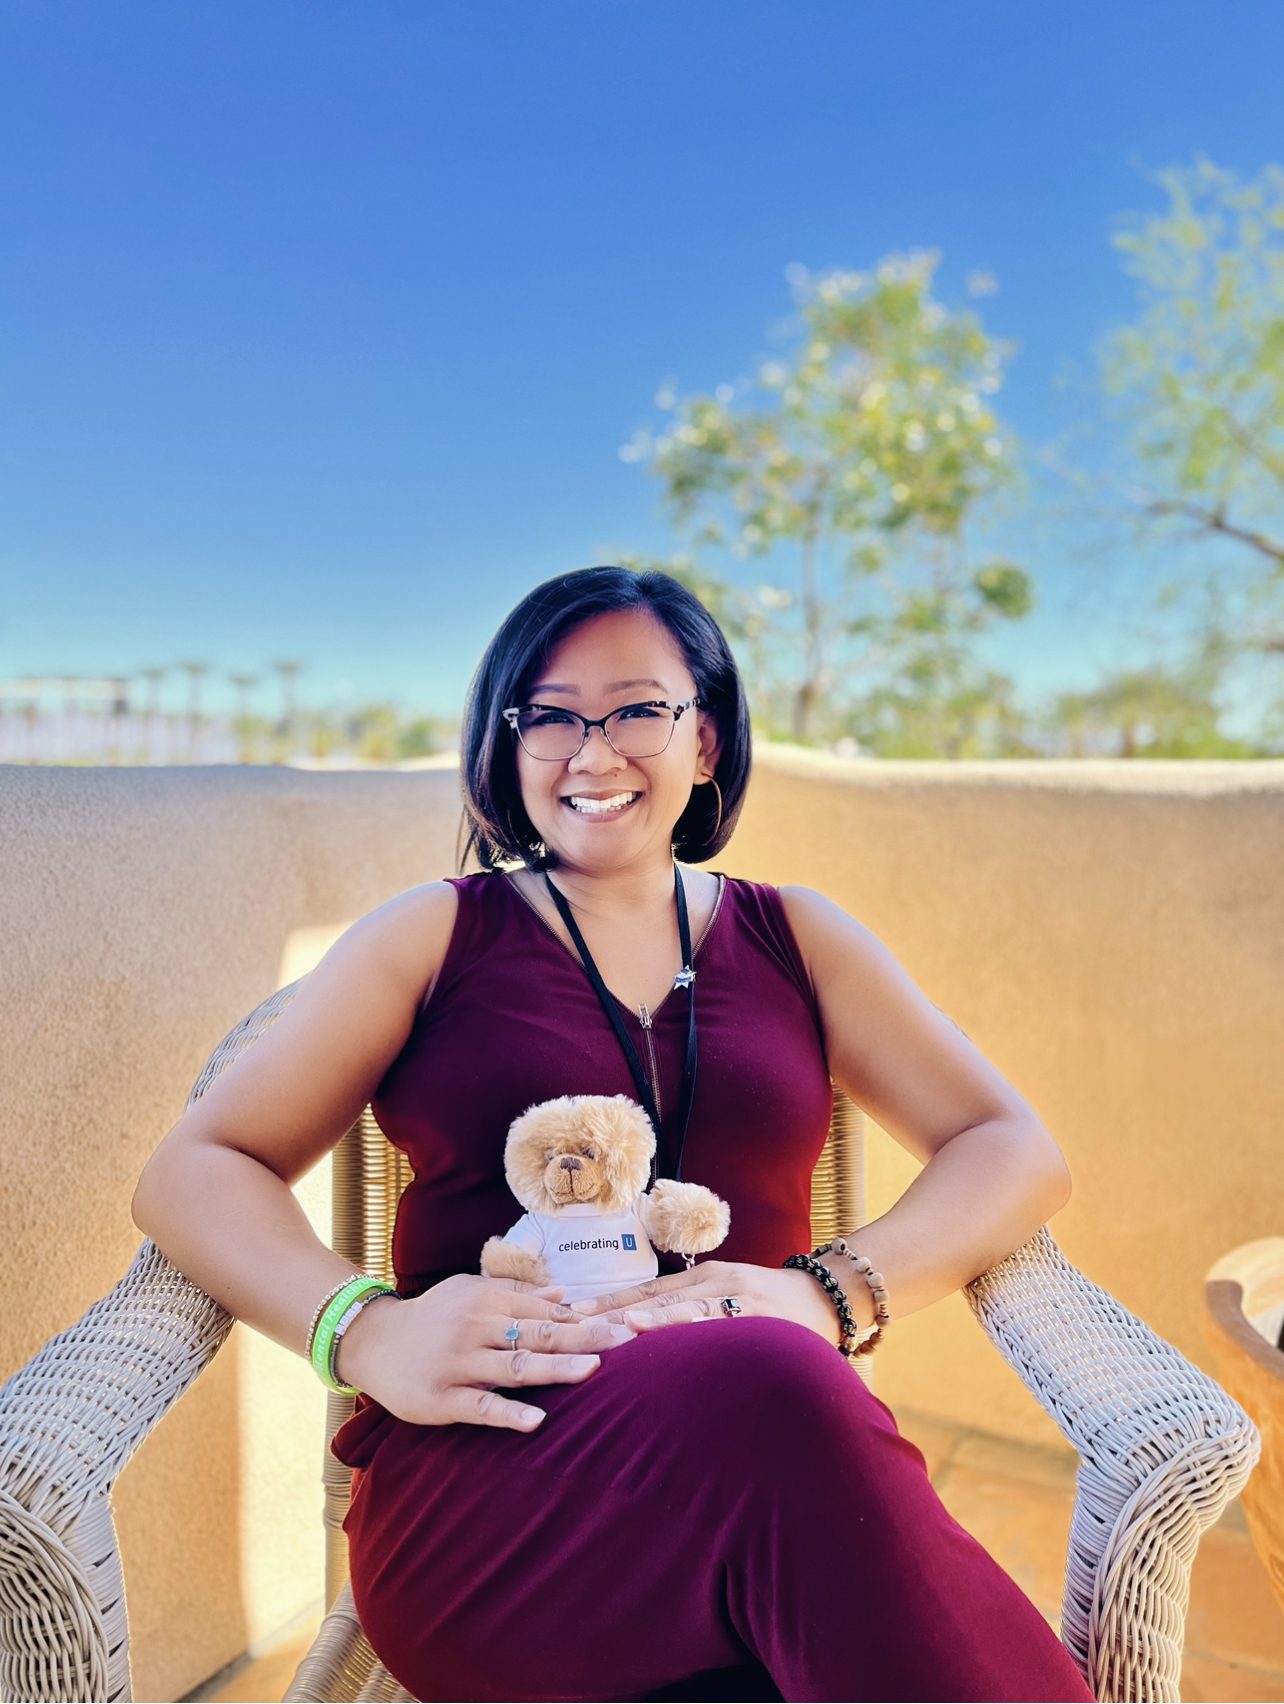 Woman smiling while sitting outdoors holding a stuffed toy.